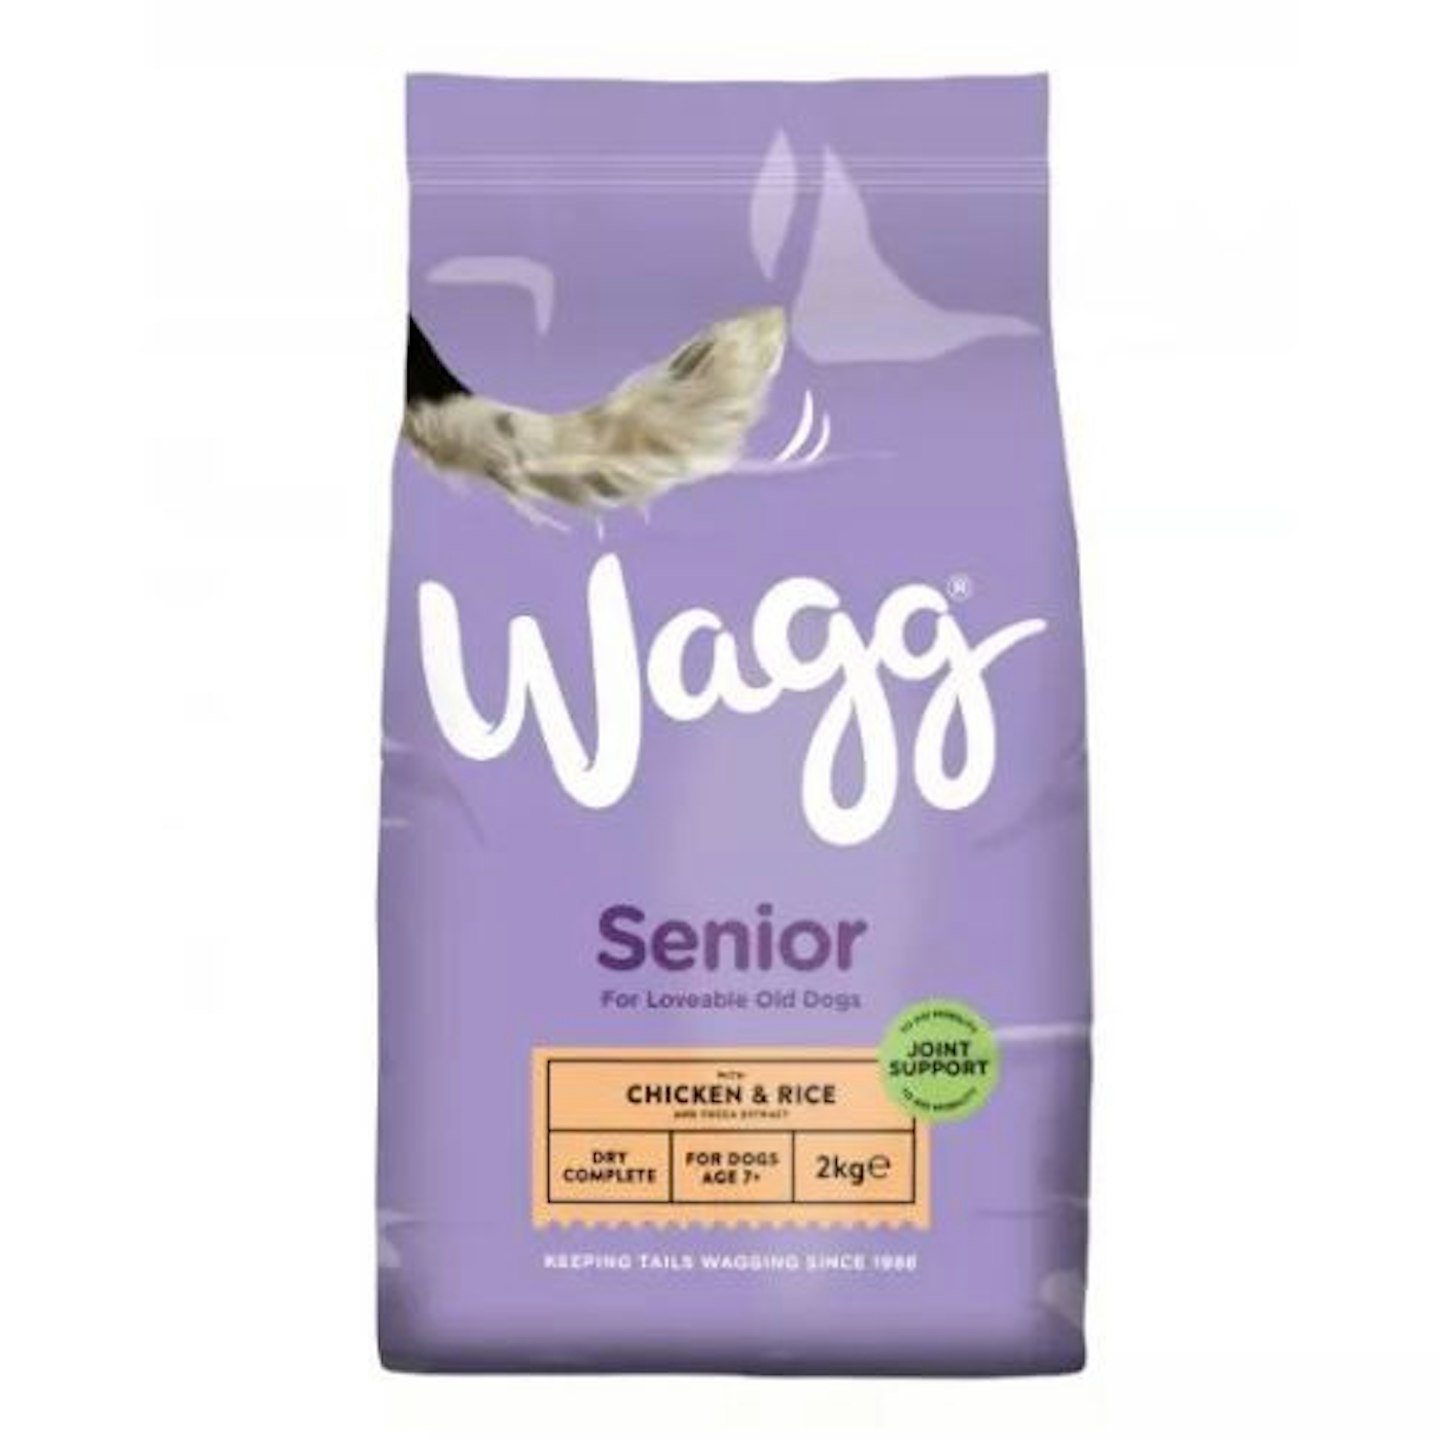 Wagg Complete Senior Chicken and Rice Dry Dog Food